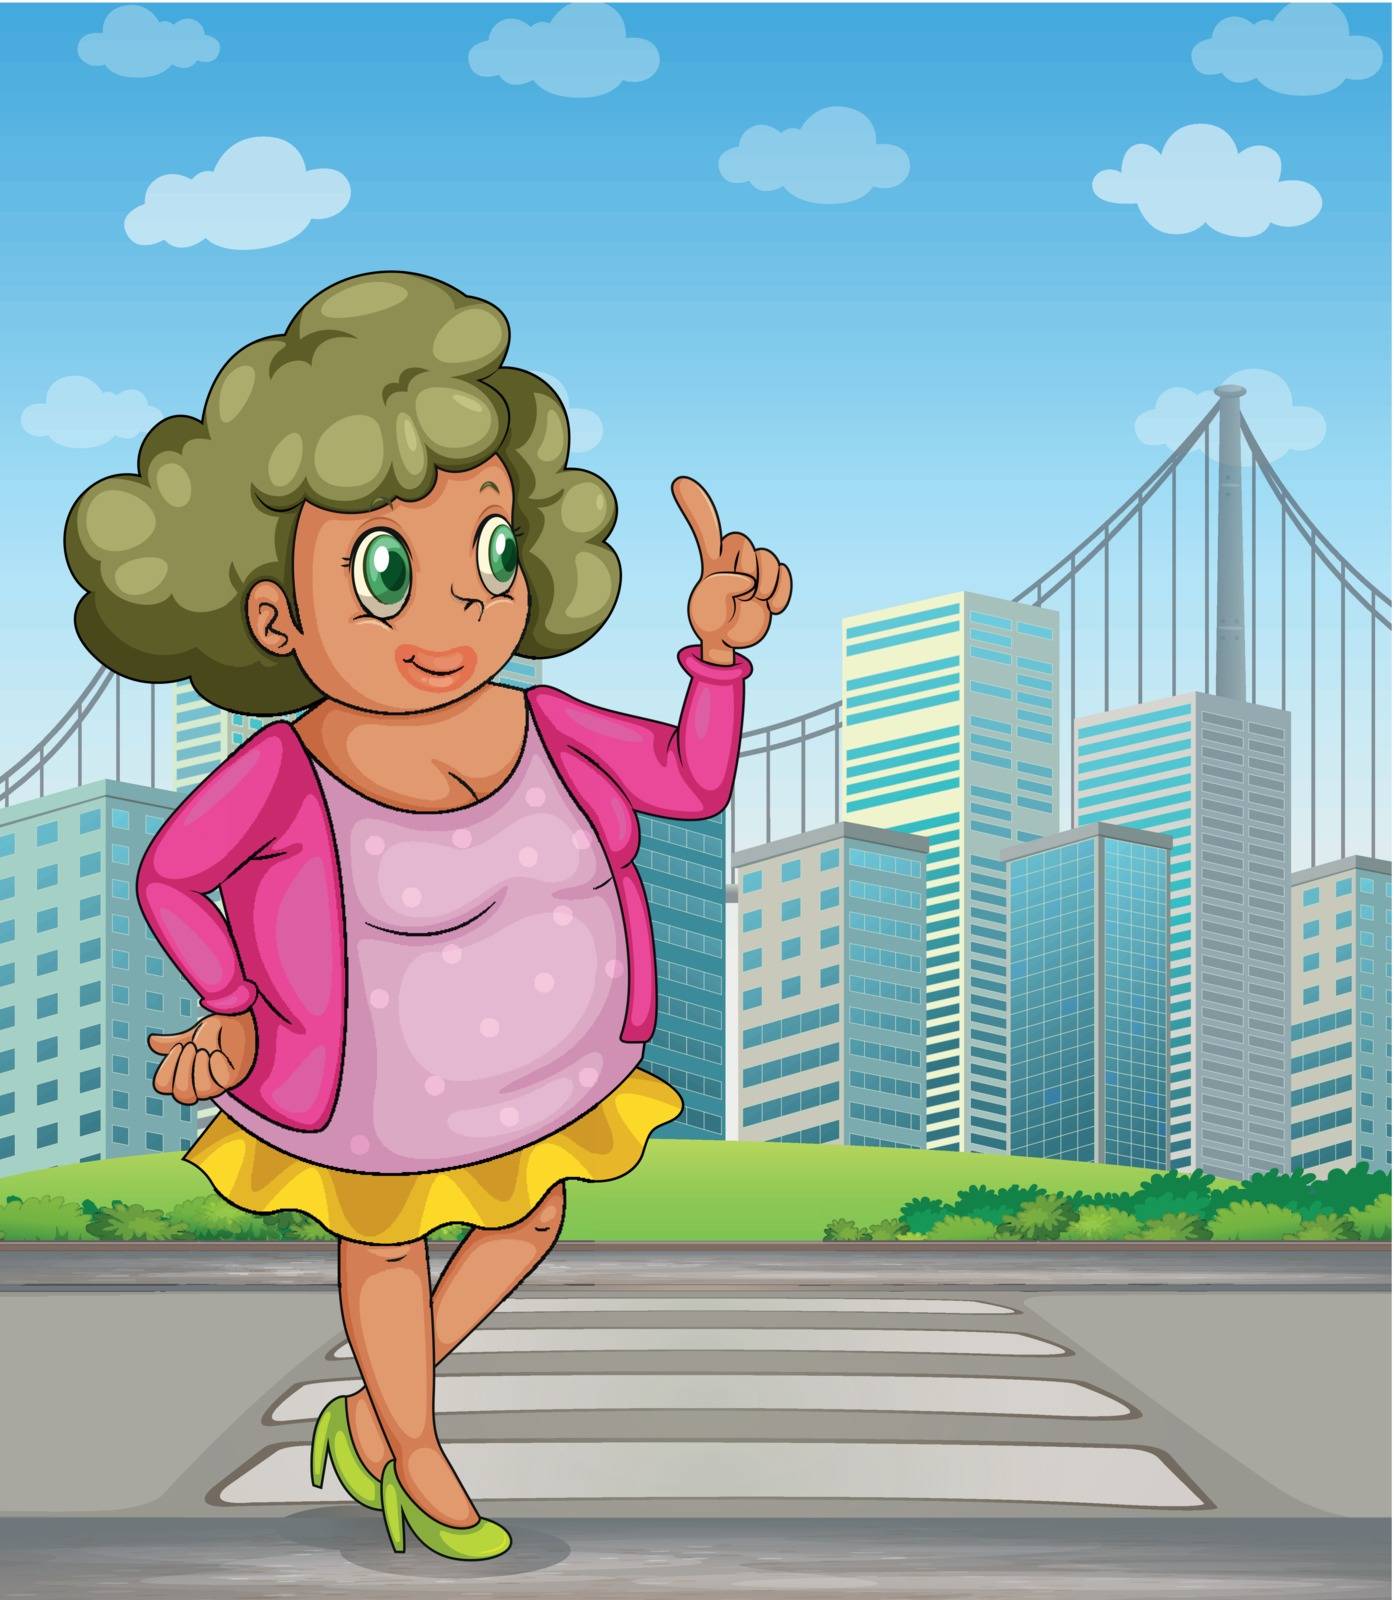 Illustration of a fat girl at the street across the tall buildings